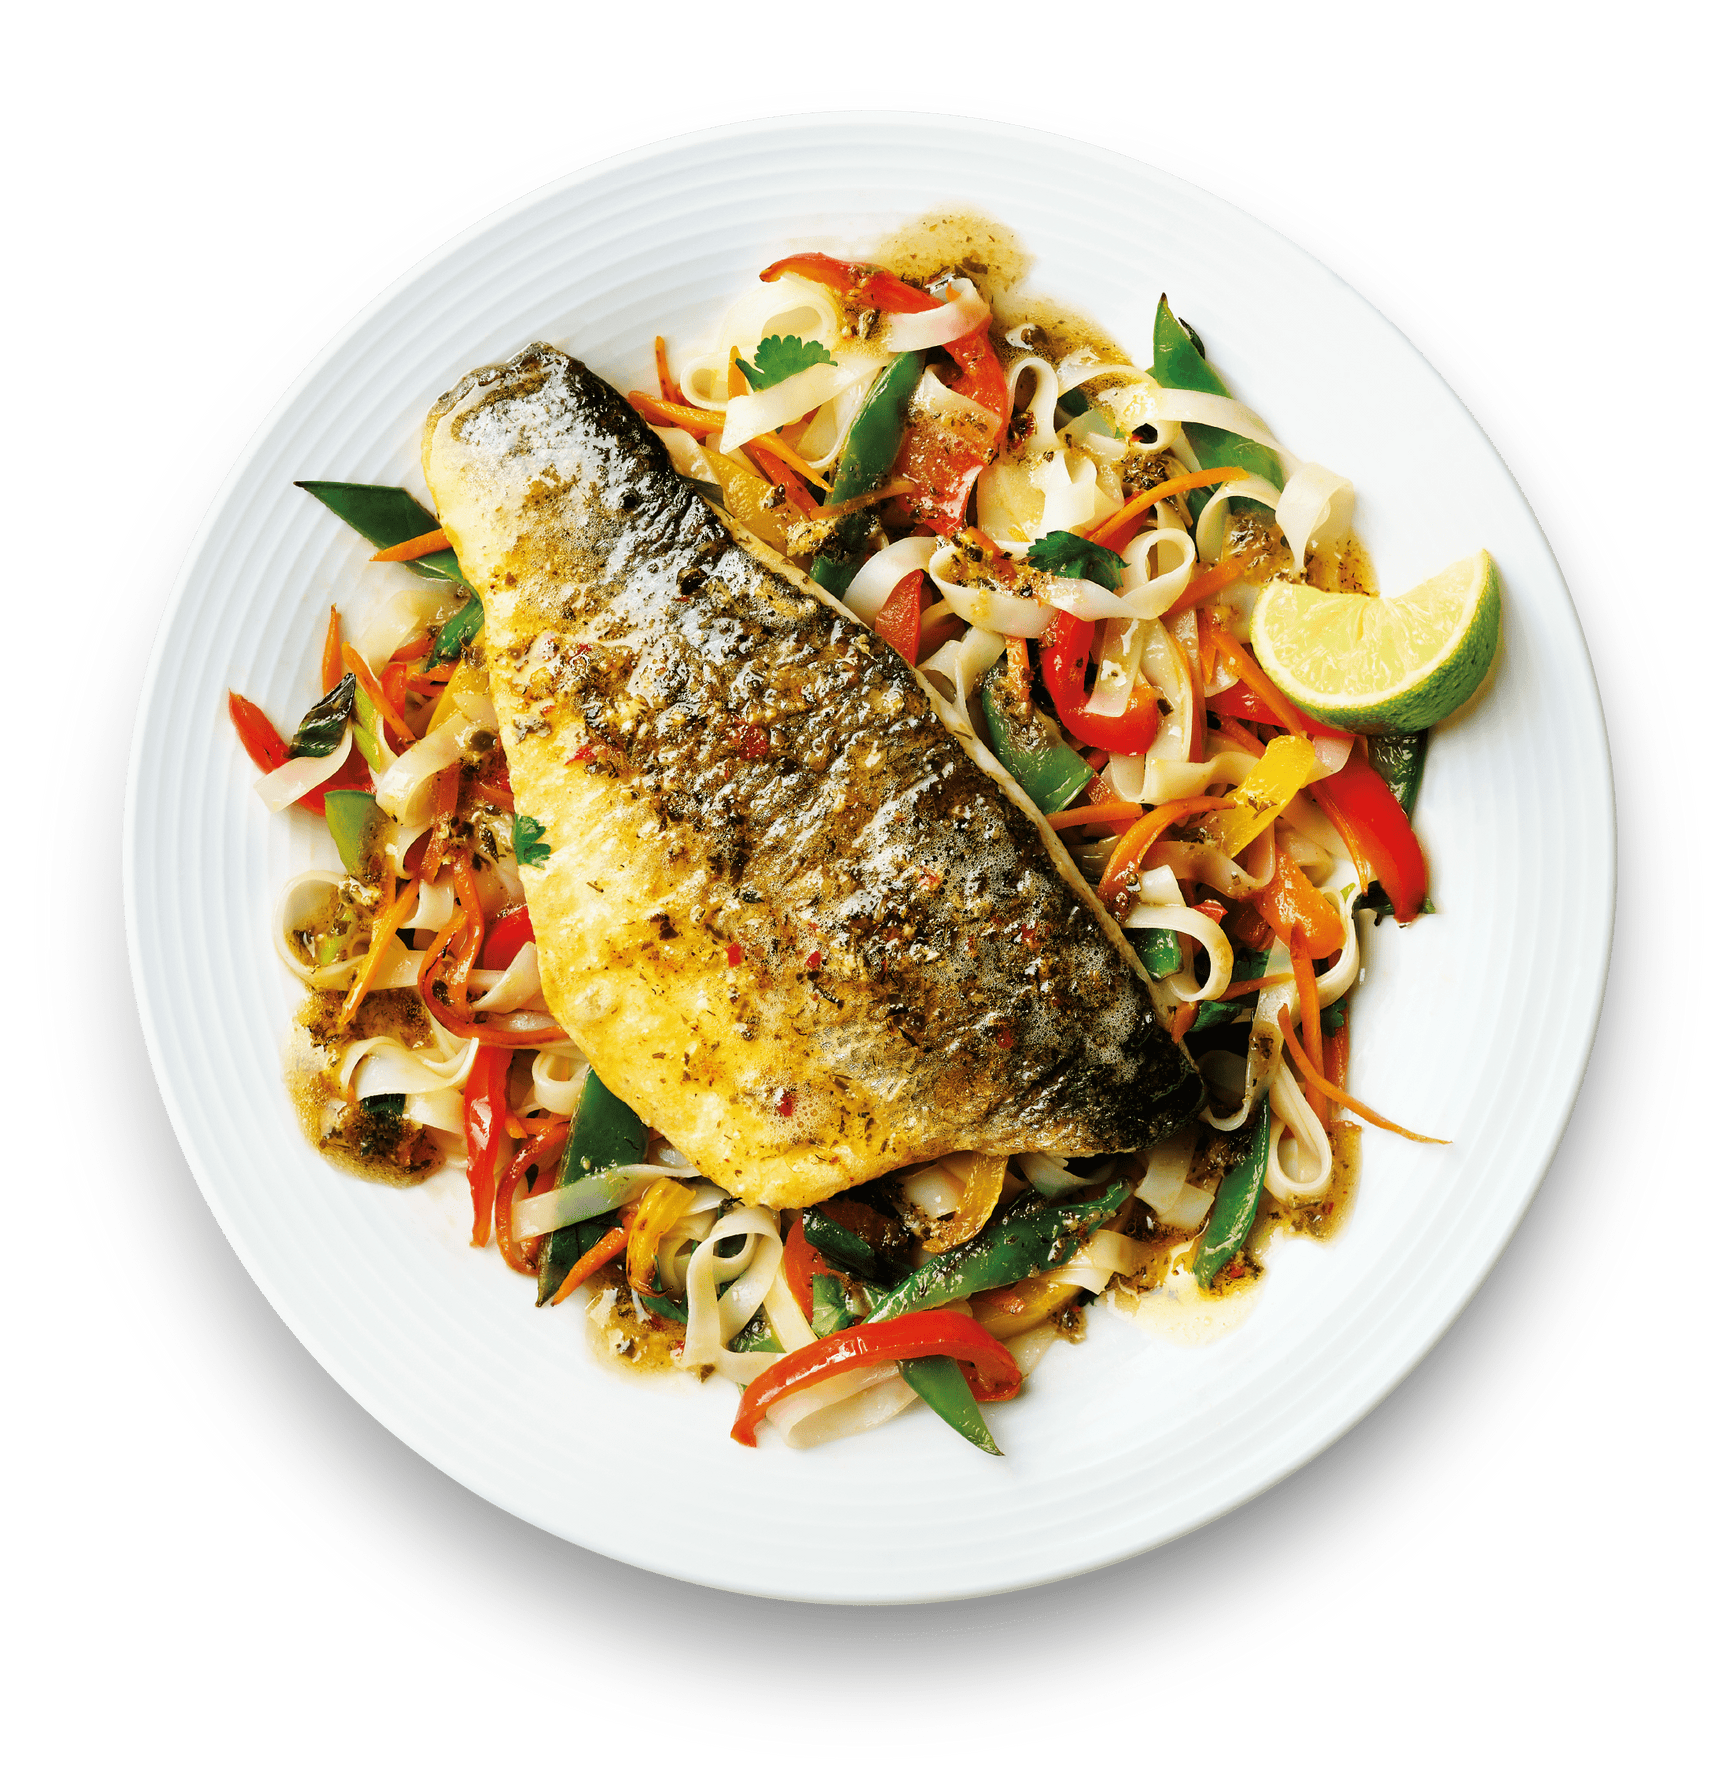 Fred's sea bass fillets served with vegetable rice noodles